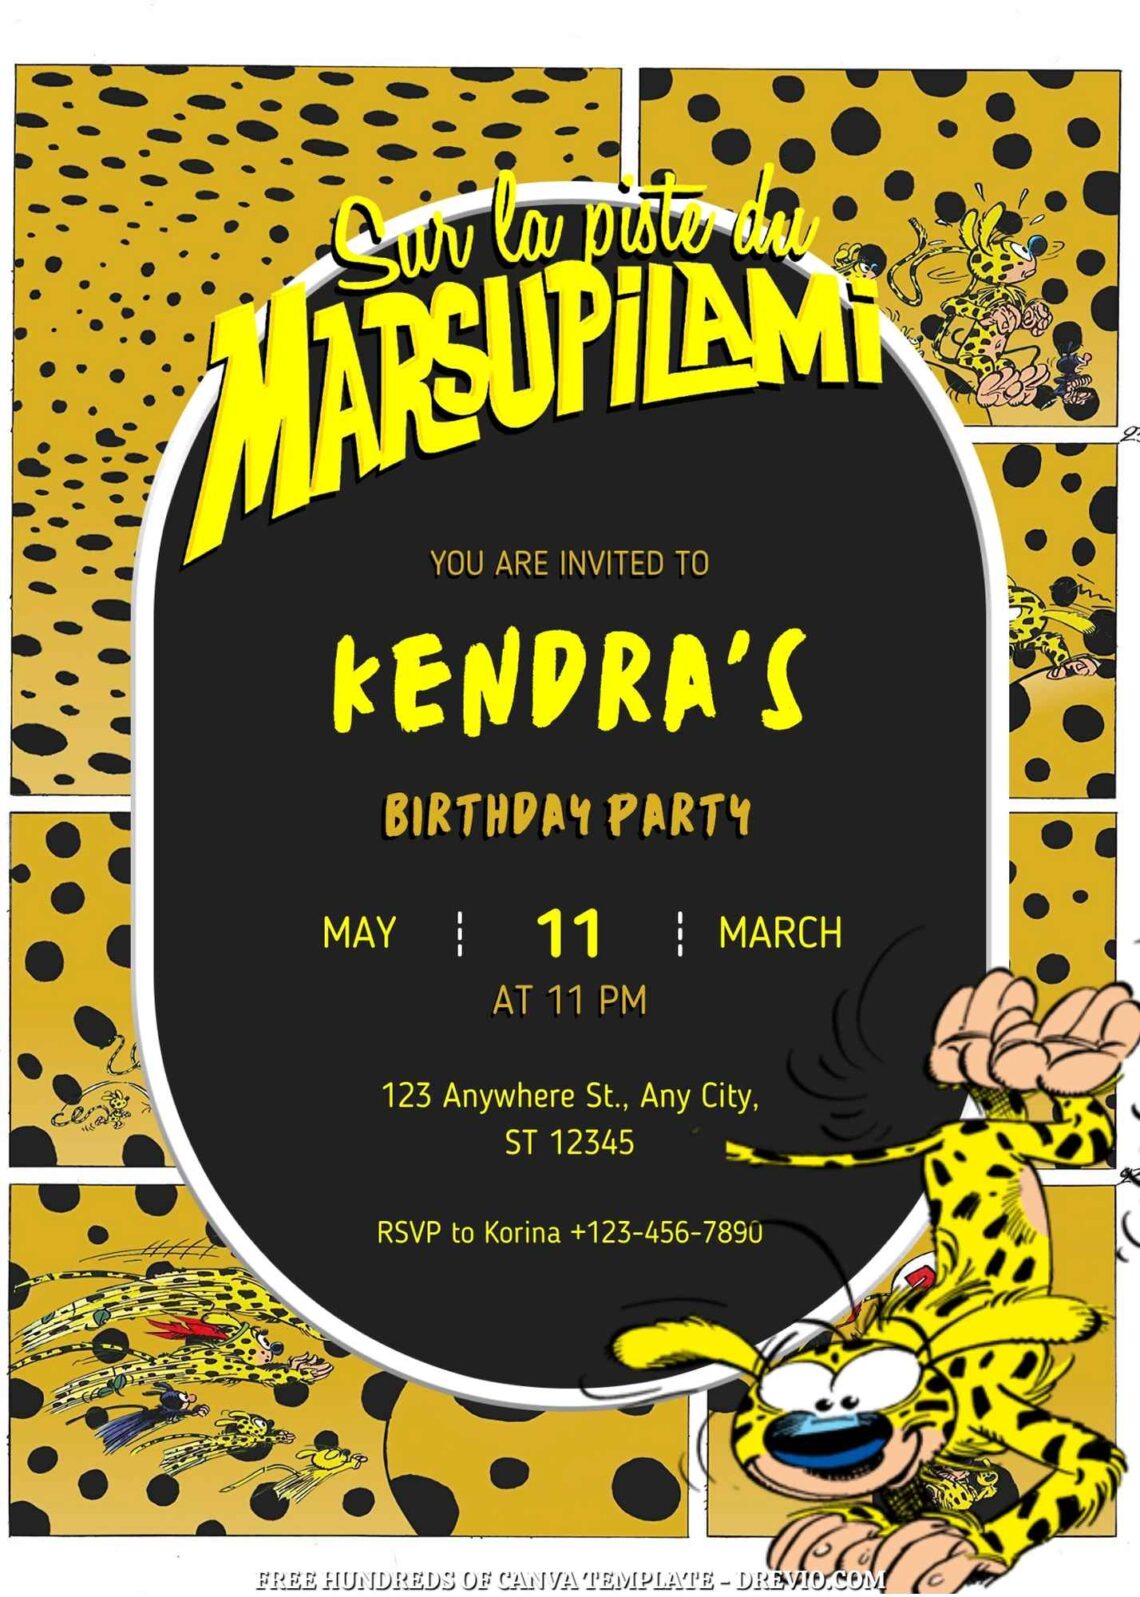 Free Marsupilami Birthday Invitations with Yellow Black Pattern in the Background